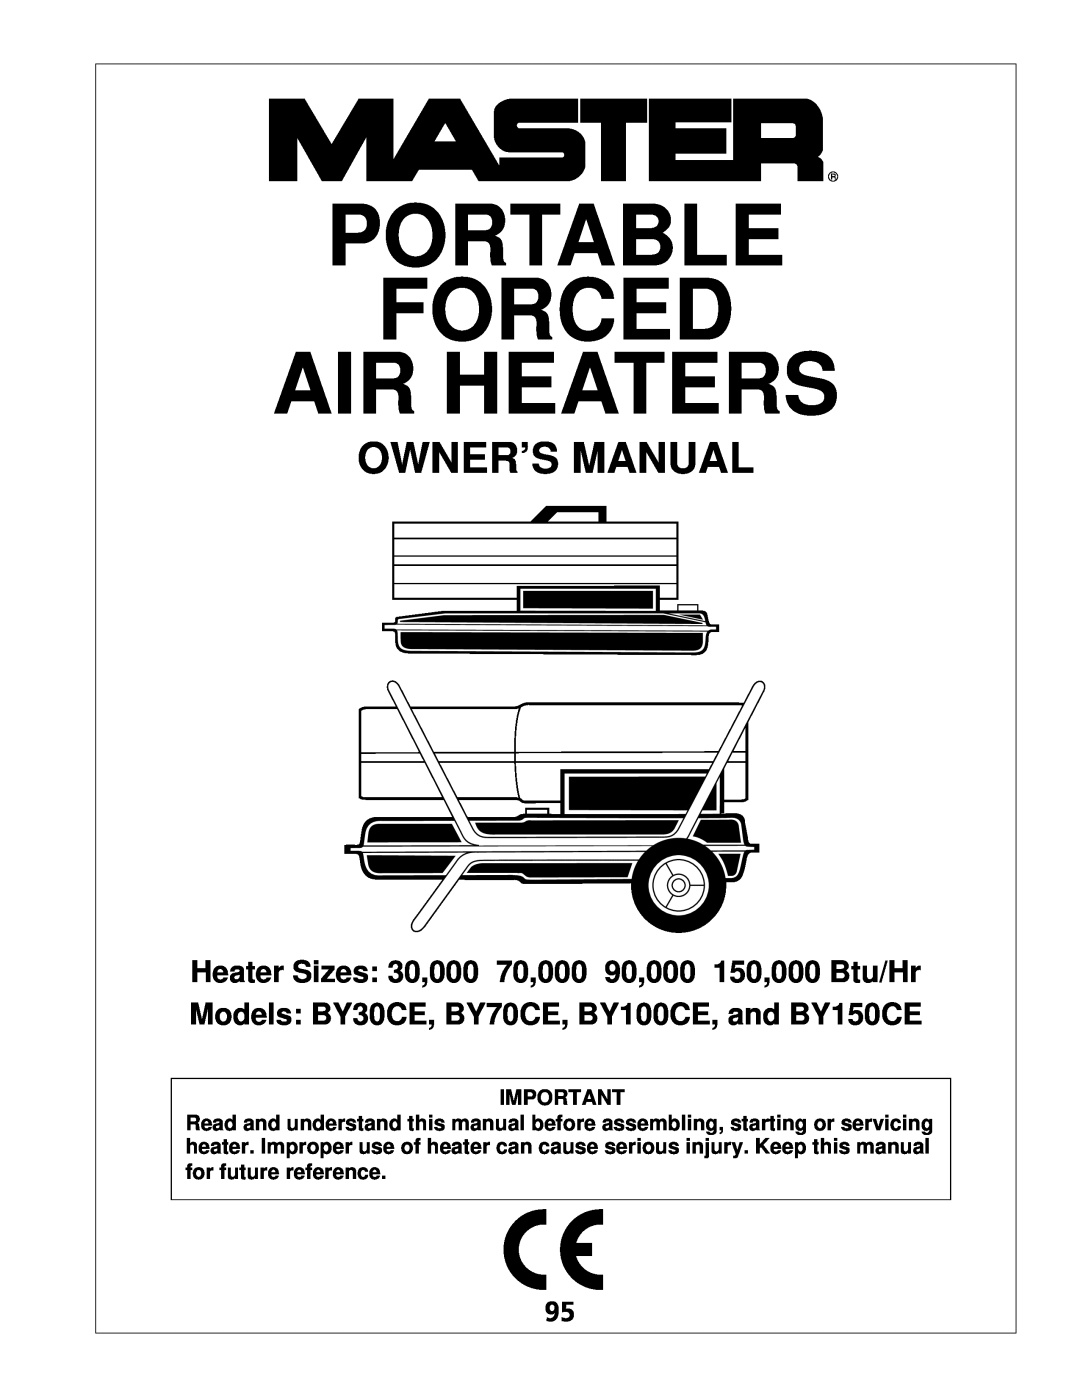 Desa owner manual Heater Sizes 30,000 70,000 90,000 150,000 Btu/Hr, Models BY30CE, BY70CE, BY100CE, and BY150CE 